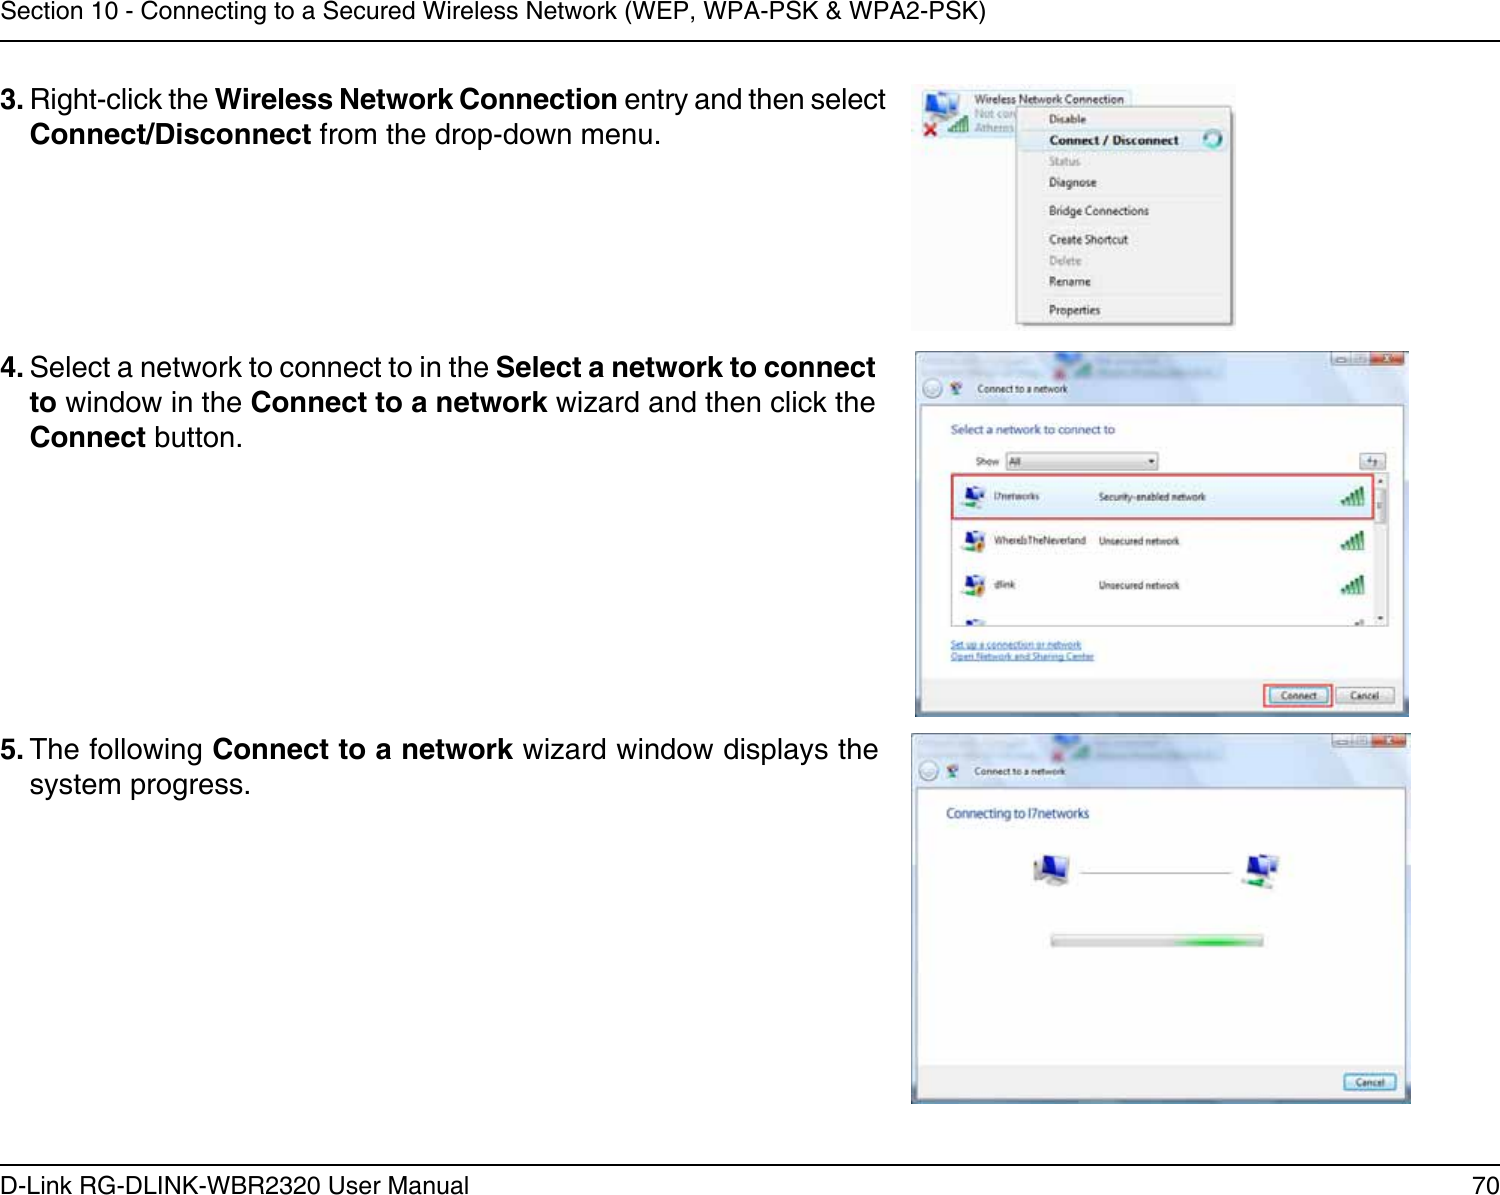 70D-Link RG-DLINK-WBR2320 User ManualSection 10 - Connecting to a Secured Wireless Network (WEP, WPA-PSK &amp; WPA2-PSK)4. Select a network to connect to in the Select a network to connect to window in the Connect to a network wizard and then click the Connect button. 5. The following Connect to a network wizard window displays the system progress. 3. Right-click the Wireless Network Connection entry and then select Connect/Disconnect from the drop-down menu. 